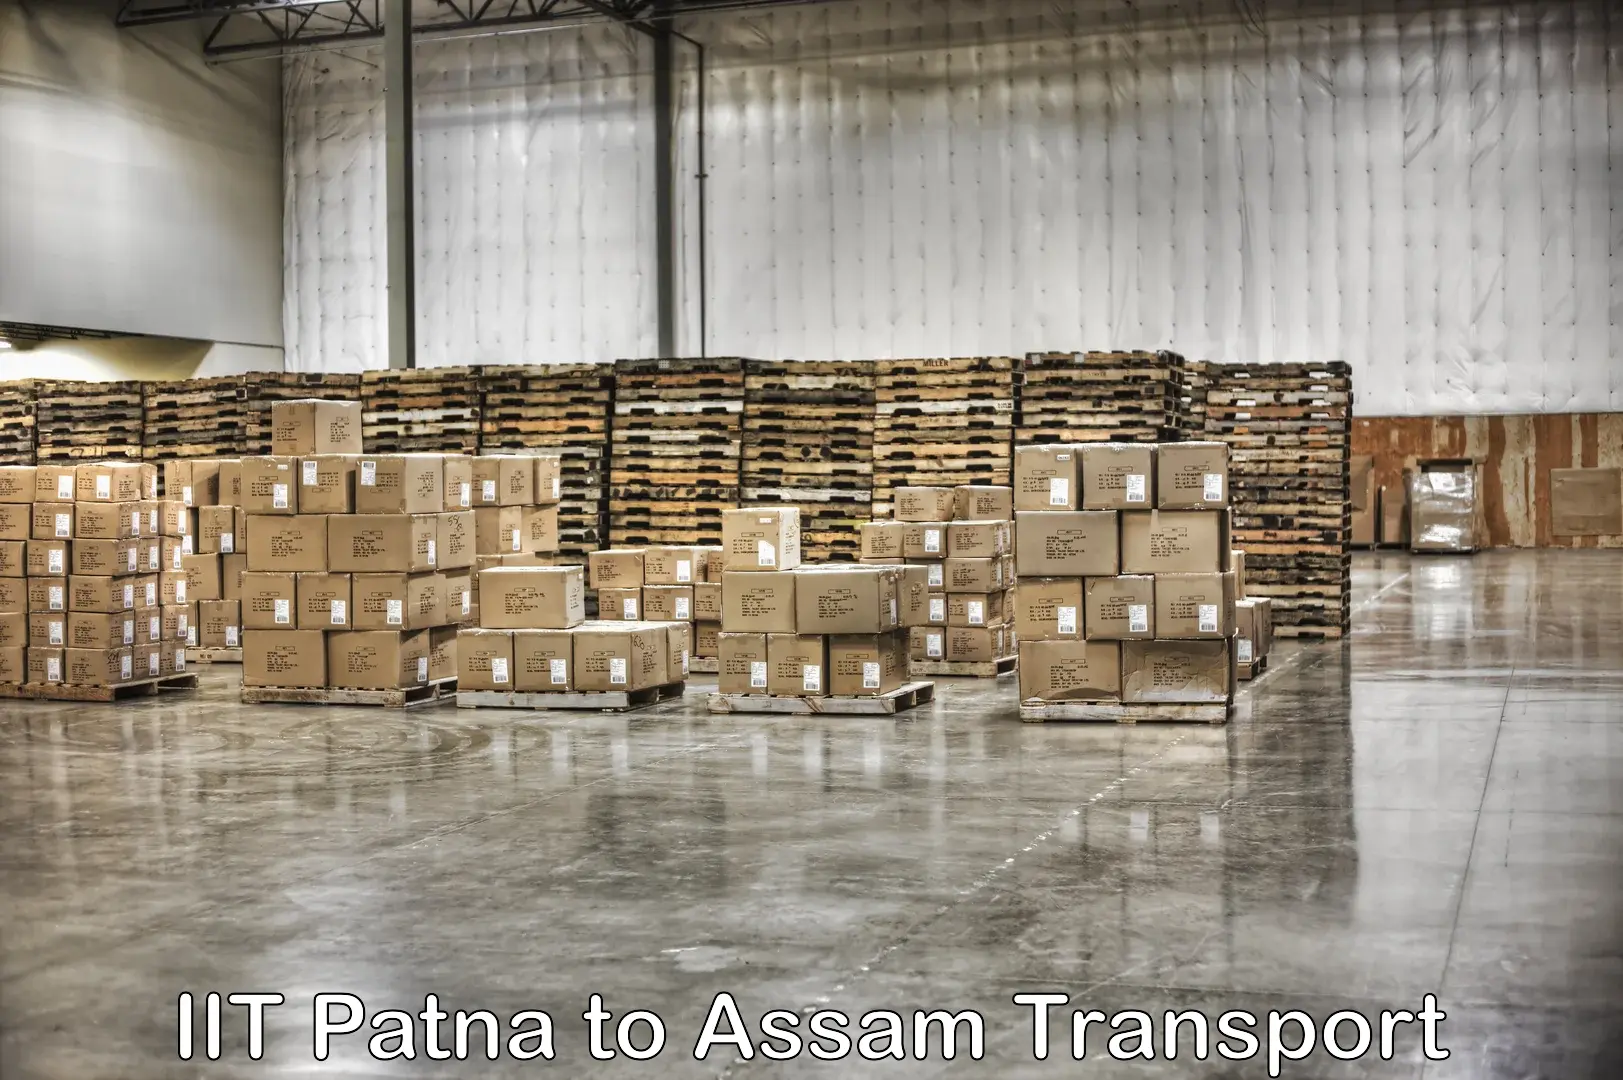 Container transport service IIT Patna to Guwahati